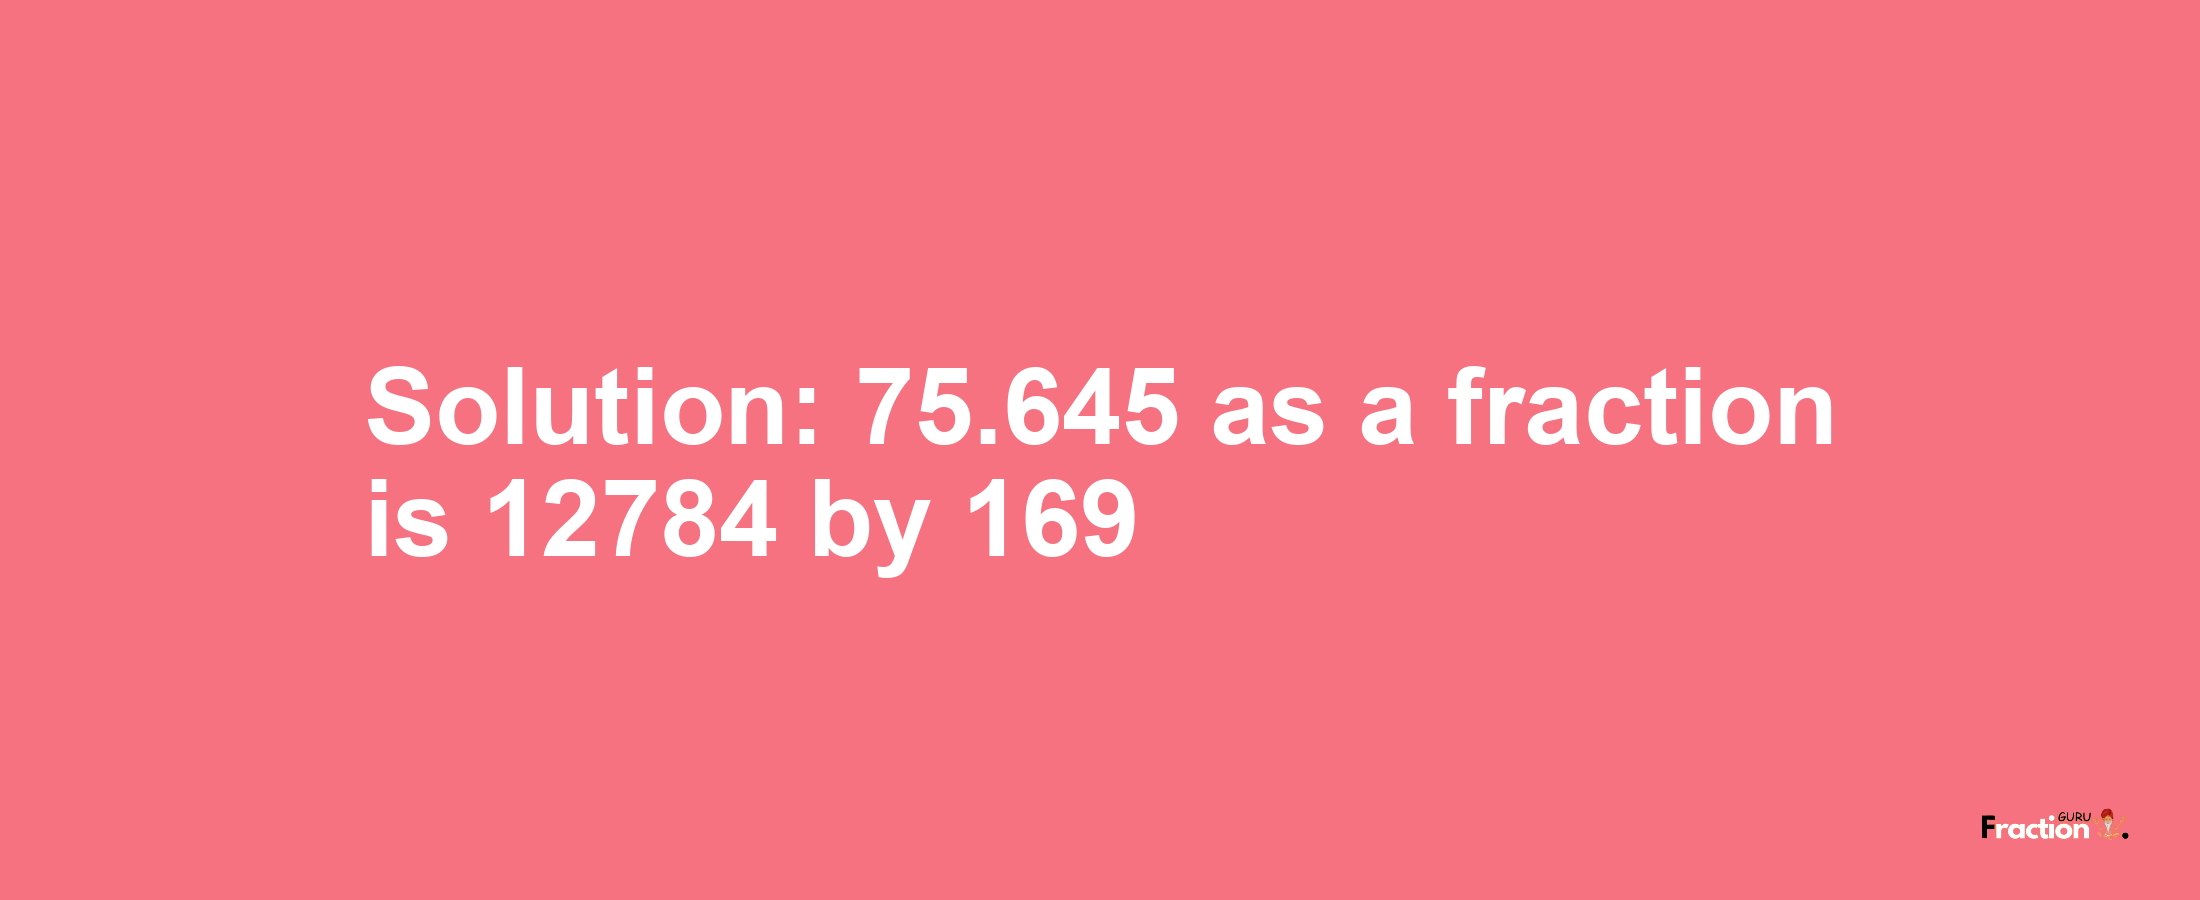 Solution:75.645 as a fraction is 12784/169